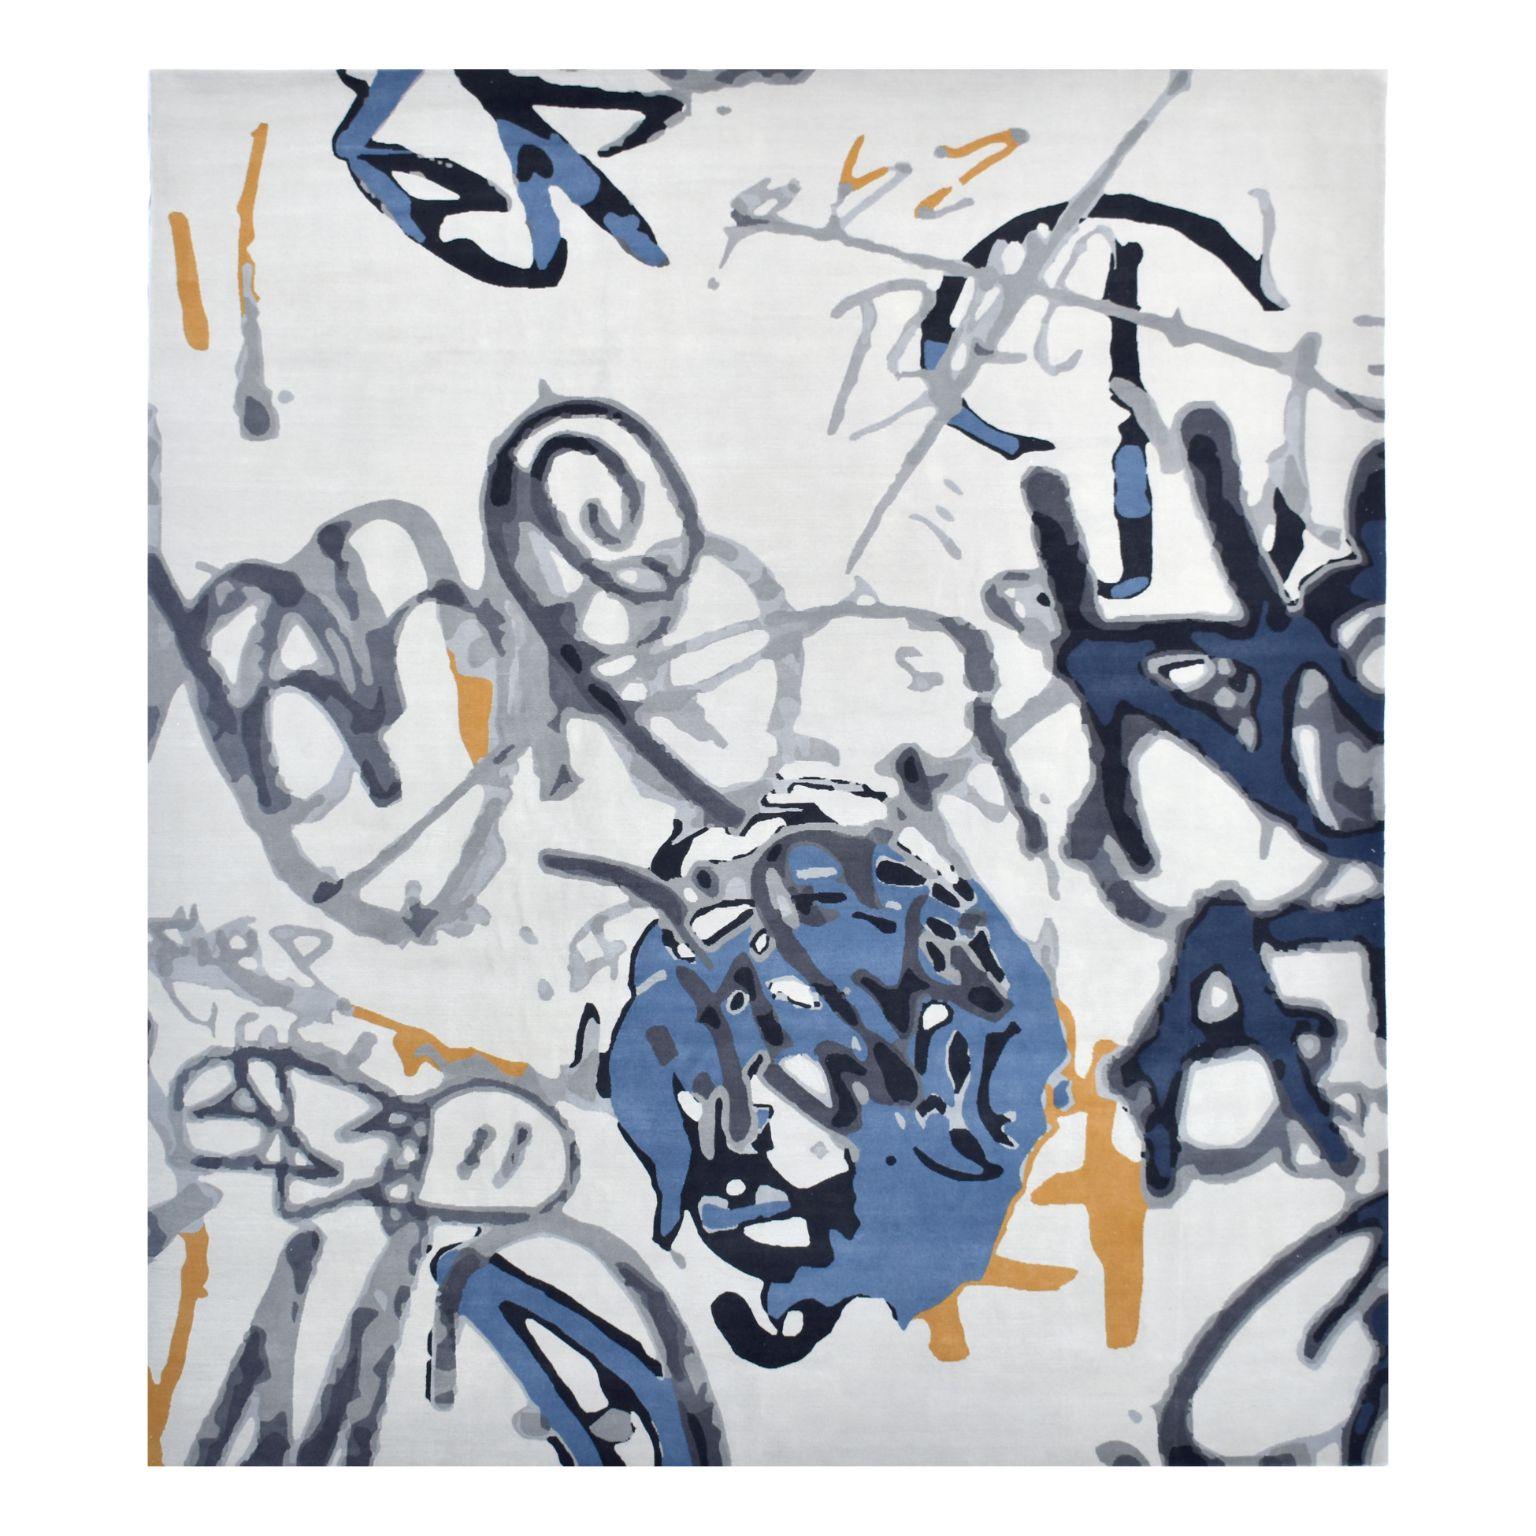 City Graffiti Small rug by Art & Loom
Dimensions: D243.4 x H304.8 cm
Materials: 100% New Zealand wool
Quality (Knots per Inch): 100
Also available in different dimensions.

Samantha Gallacher has always had a keen eye for aesthetics, drawing